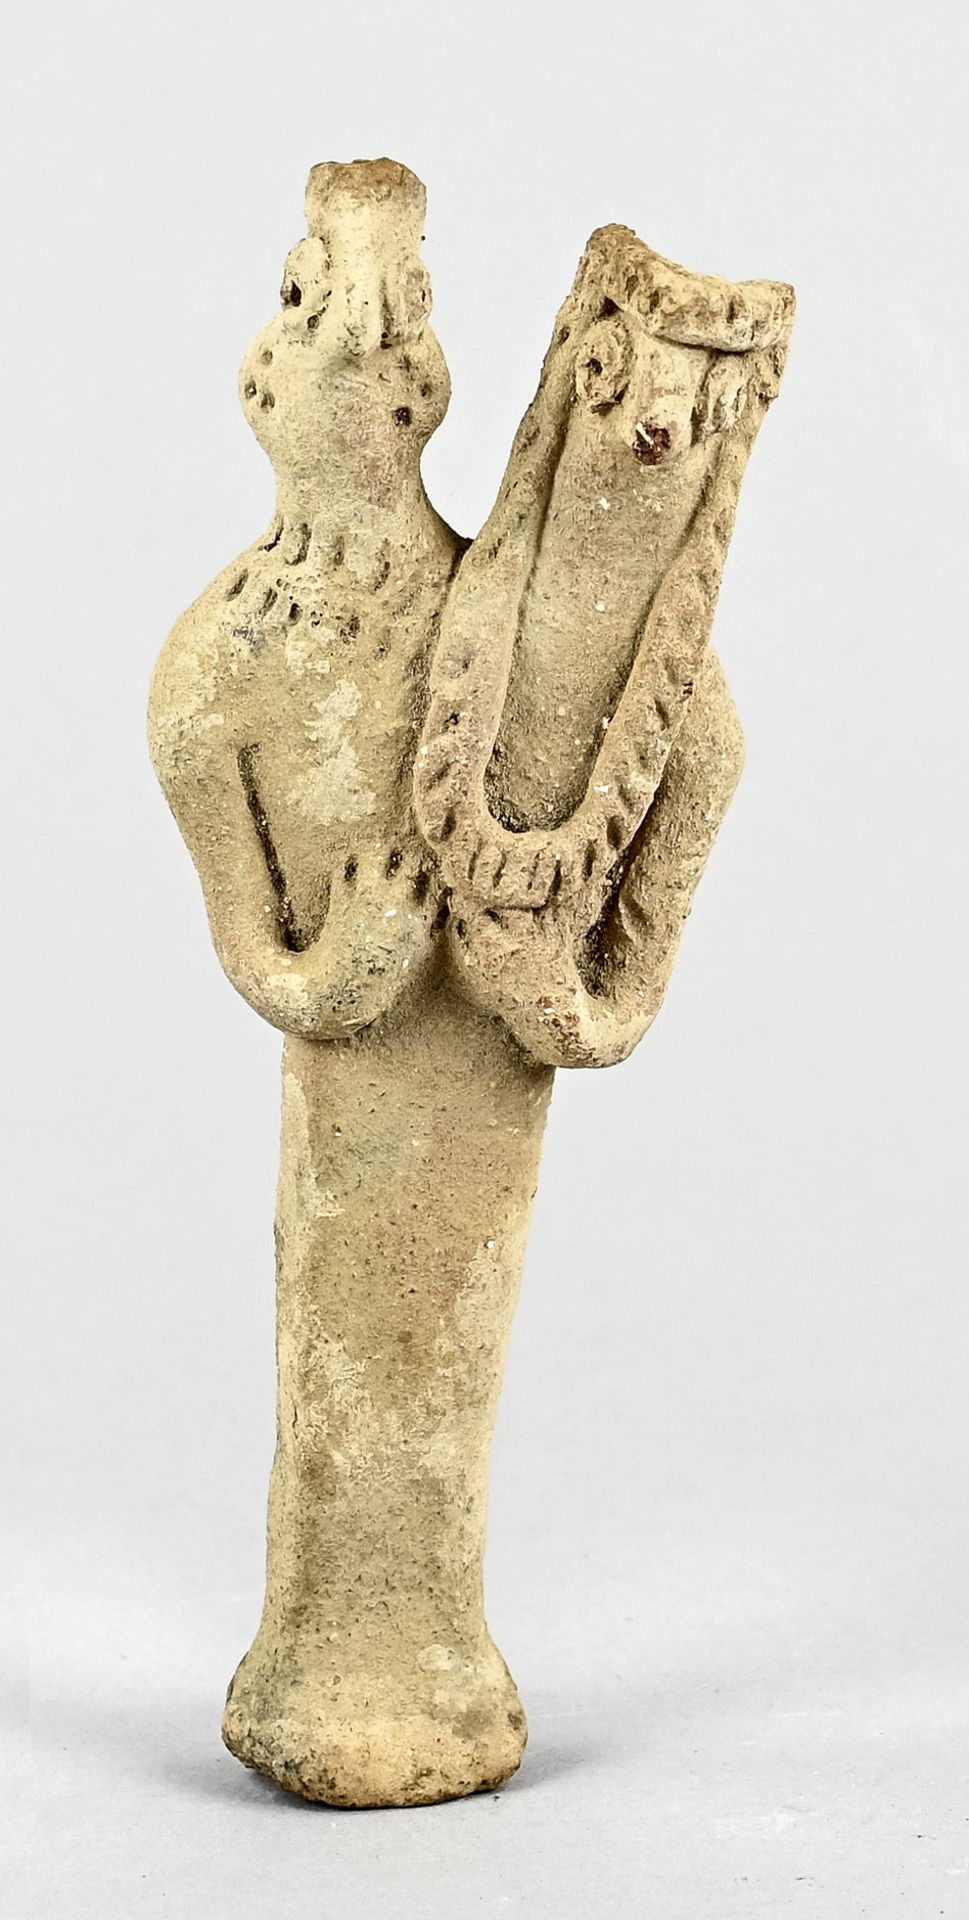 Double headed idol, Anatolia, terracotta, man and woman, two arms in front of the chest on the body